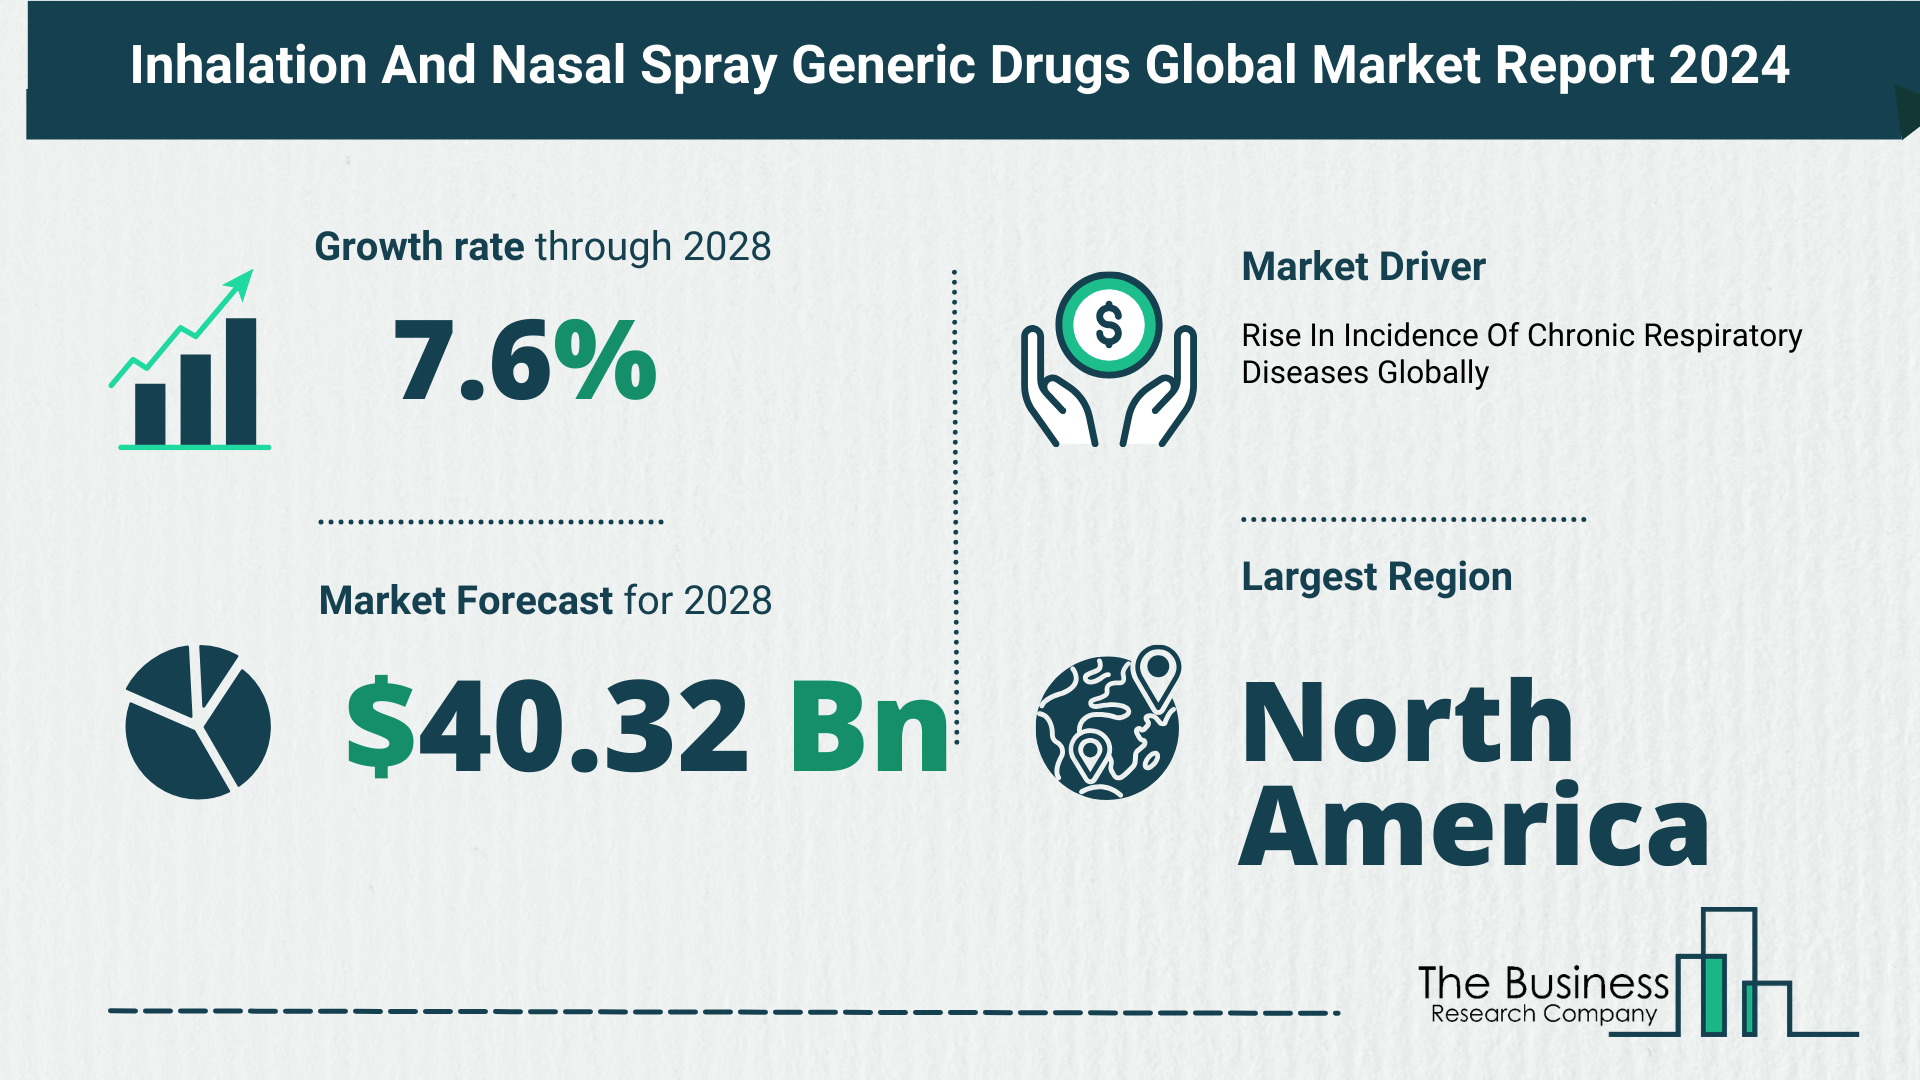 5 Takeaways From The Inhalation And Nasal Spray Generic Drugs Market Overview 2024